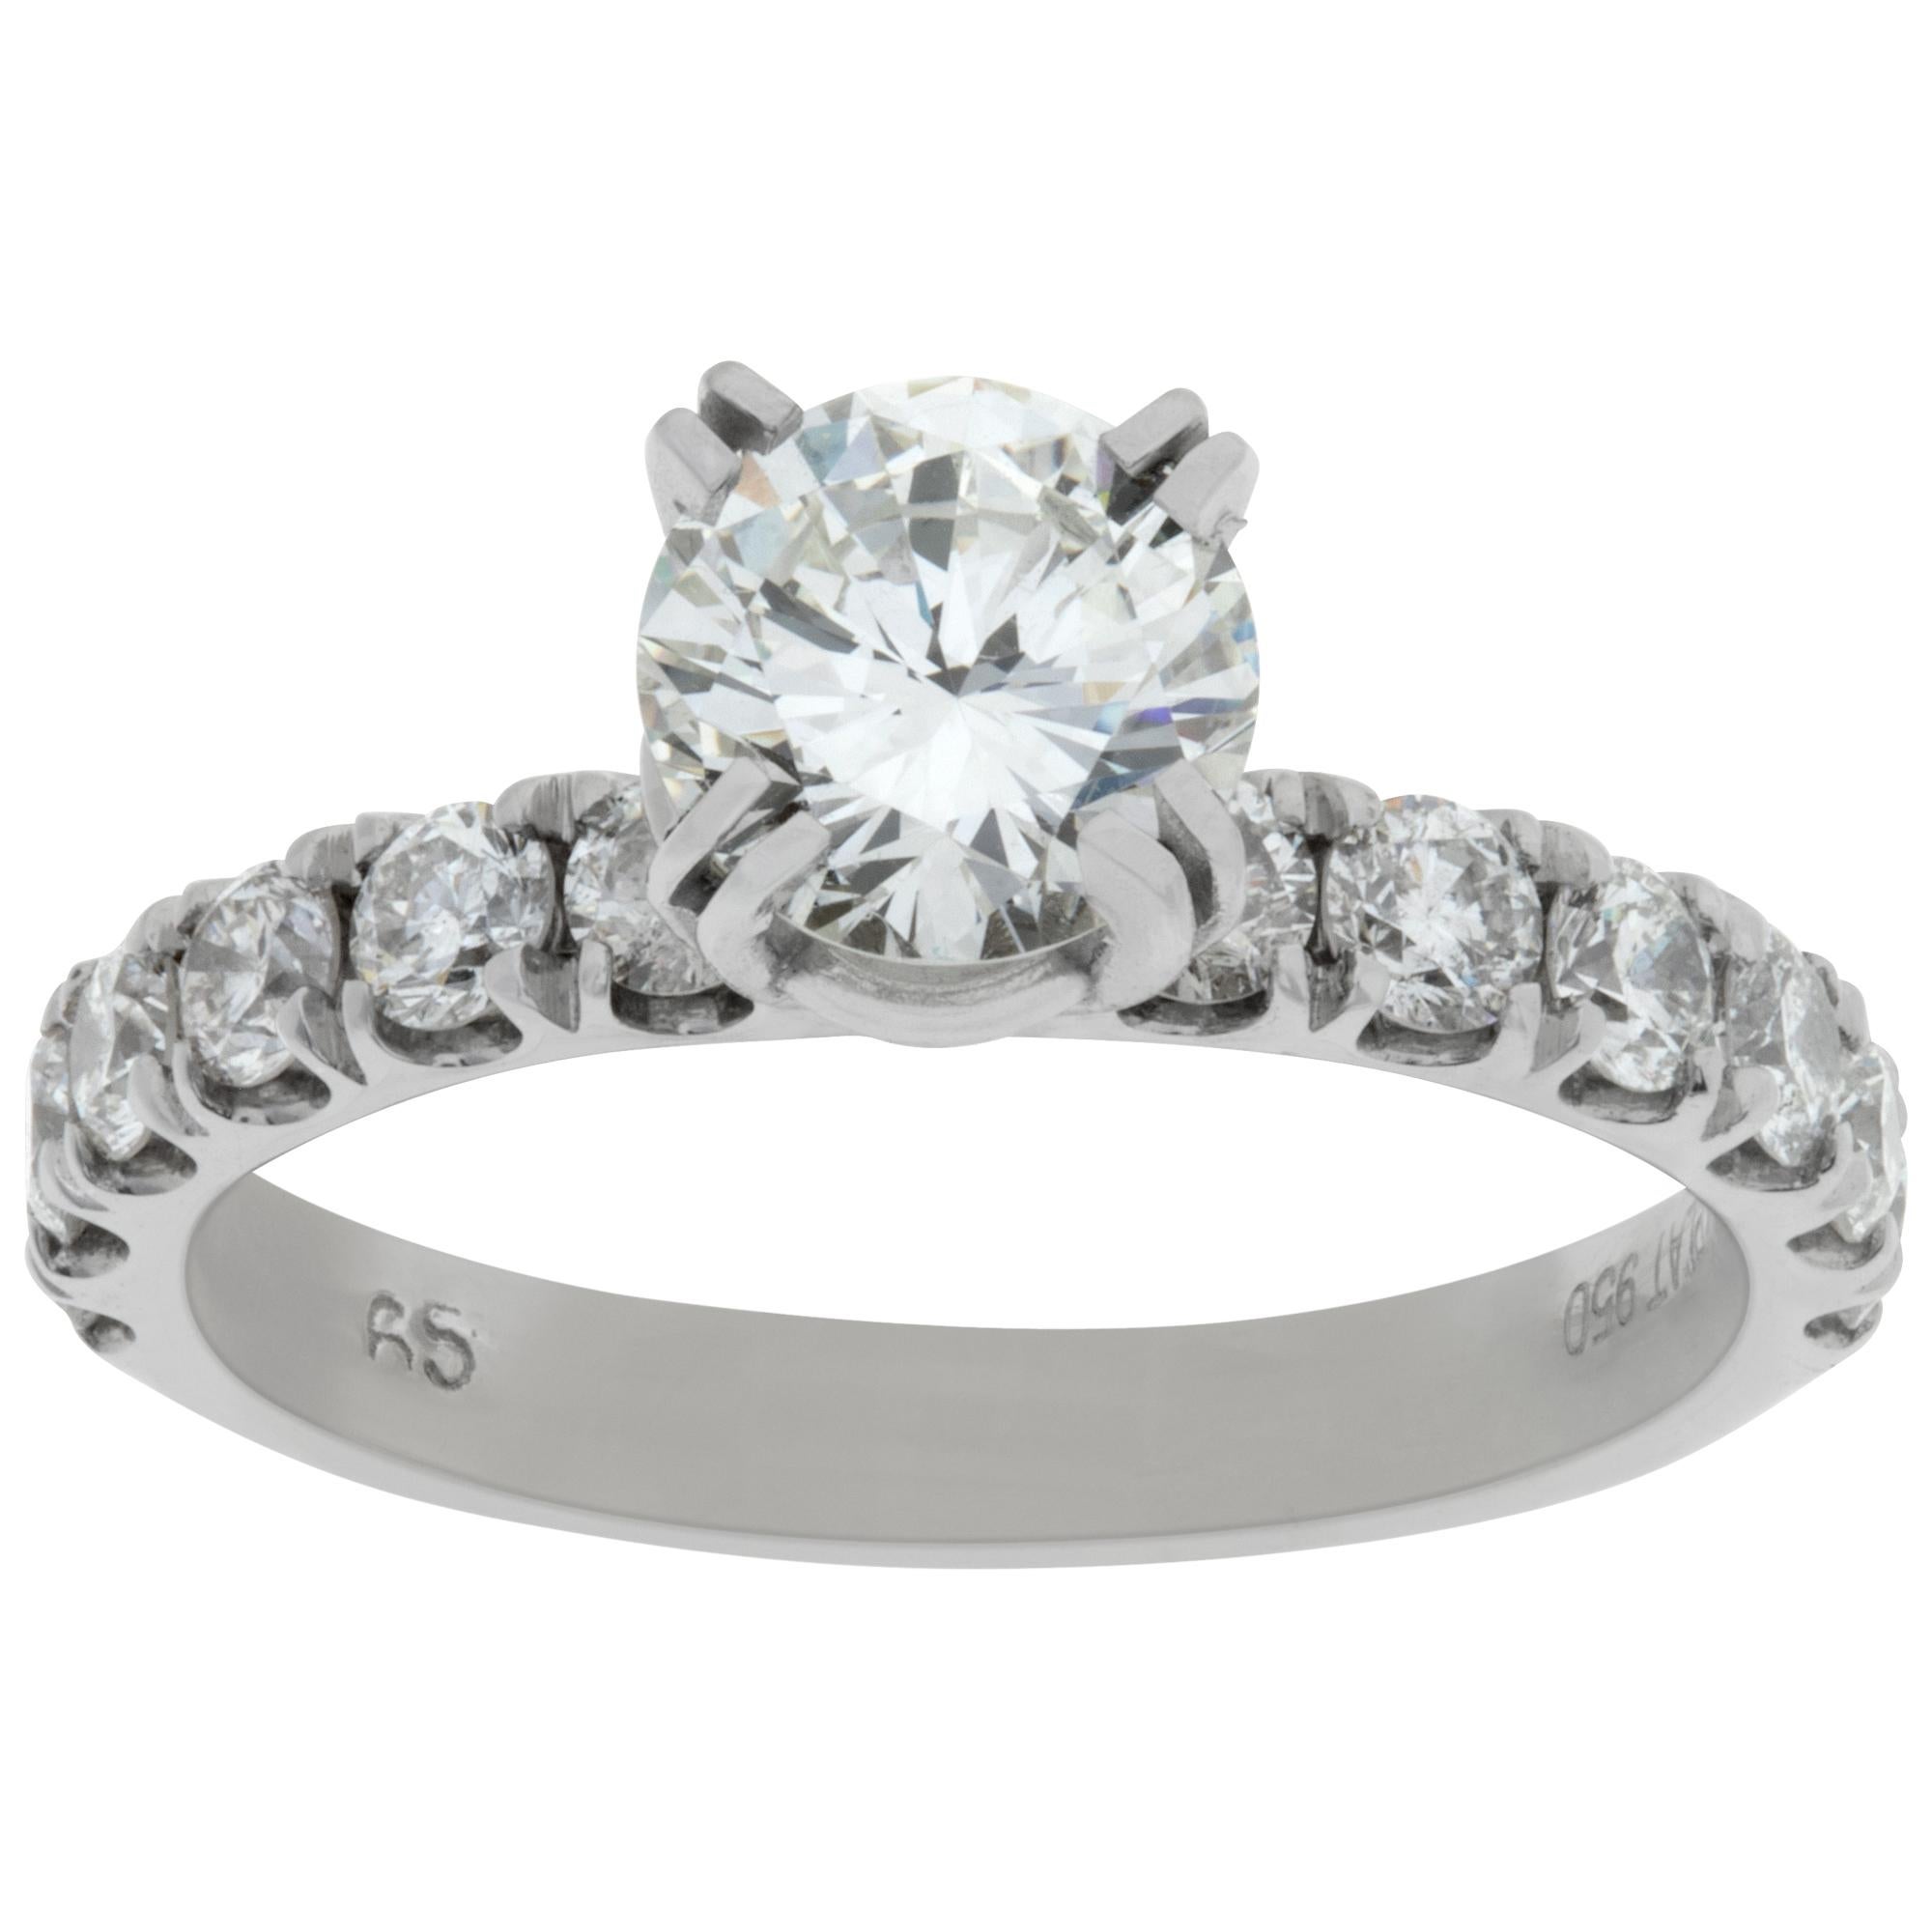 GIA certified round brilliant cut diamond 1.07 carat (I color, VS2 clarity) ring set in platinum with 12 diamonds total weight 1 carat G-H color, VS clarity. Size 6This GIA certified ring is currently size 6 and some items can be sized up or down,